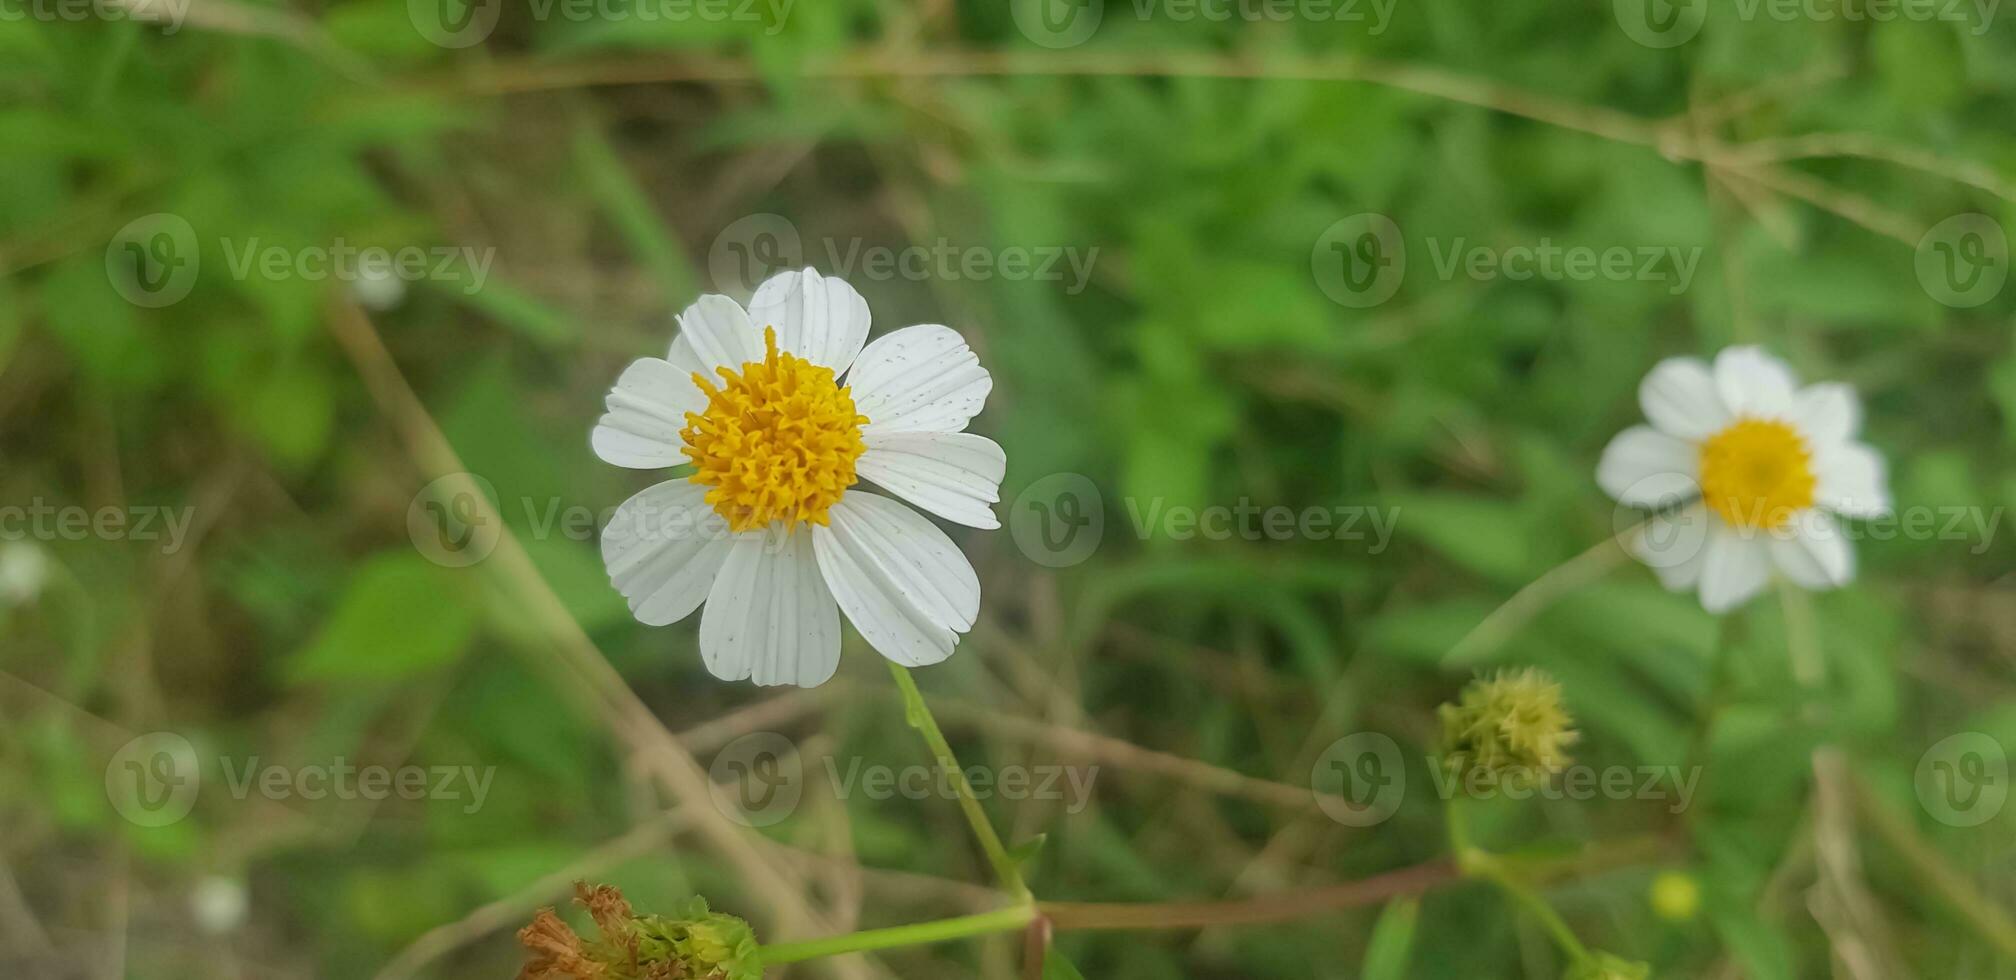 Beautiful Daisy flowers with green foliage or Bellis perennis L, or Compositae blooming in the park during sunlight of summer day photo